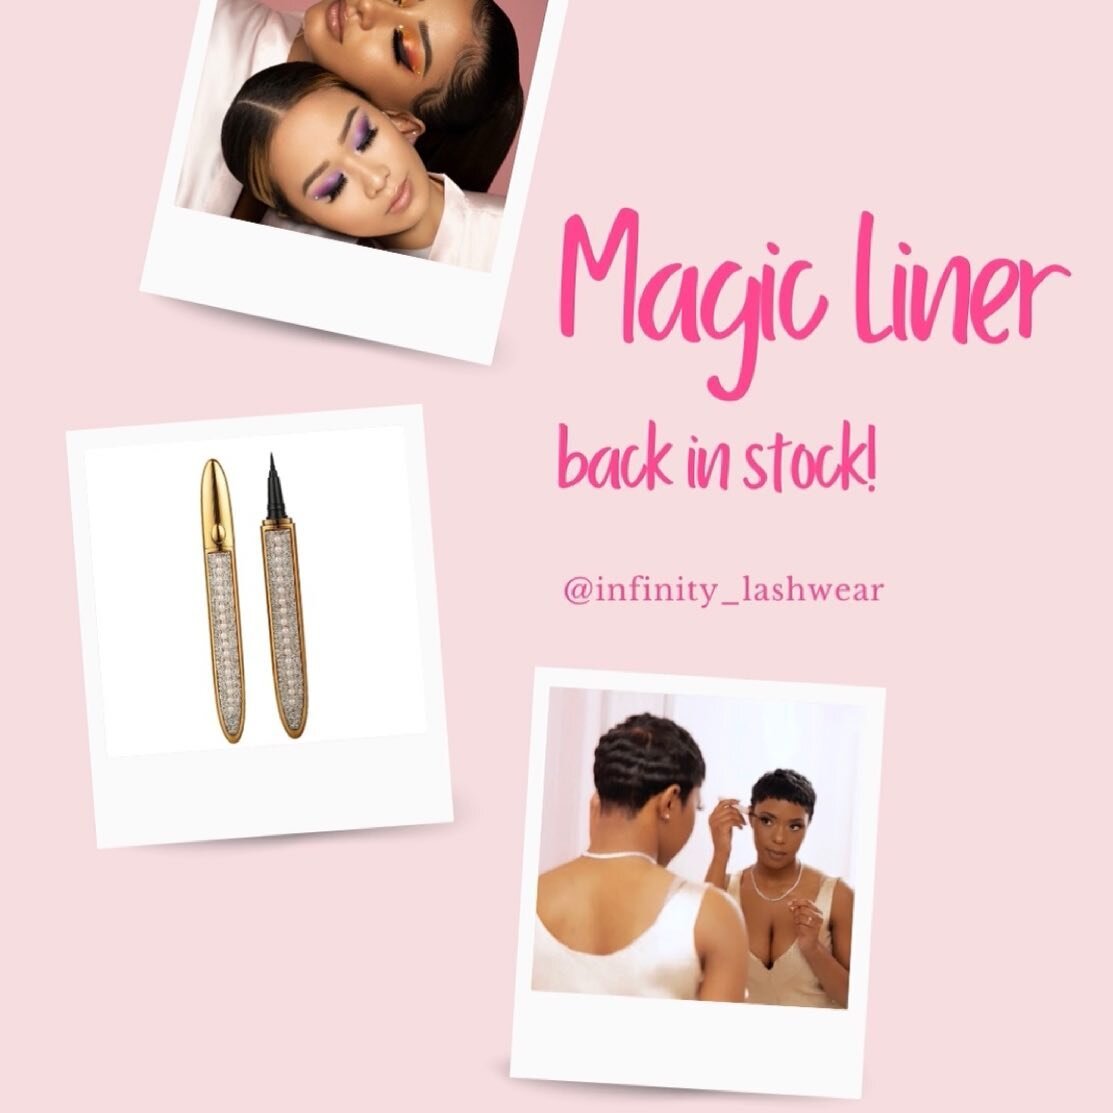 ⭐️RESTOCKED⭐️ our Magic Liner is back on the site, click the link in our bio to get yours today! 

They sell so fast! 
.
.
.
.
.
.
.
.
.
#forevergirl #forever #infinity #infinitylashwear #lashwear #MUA #prettygirls #explorepage #beauty #makeup #insta